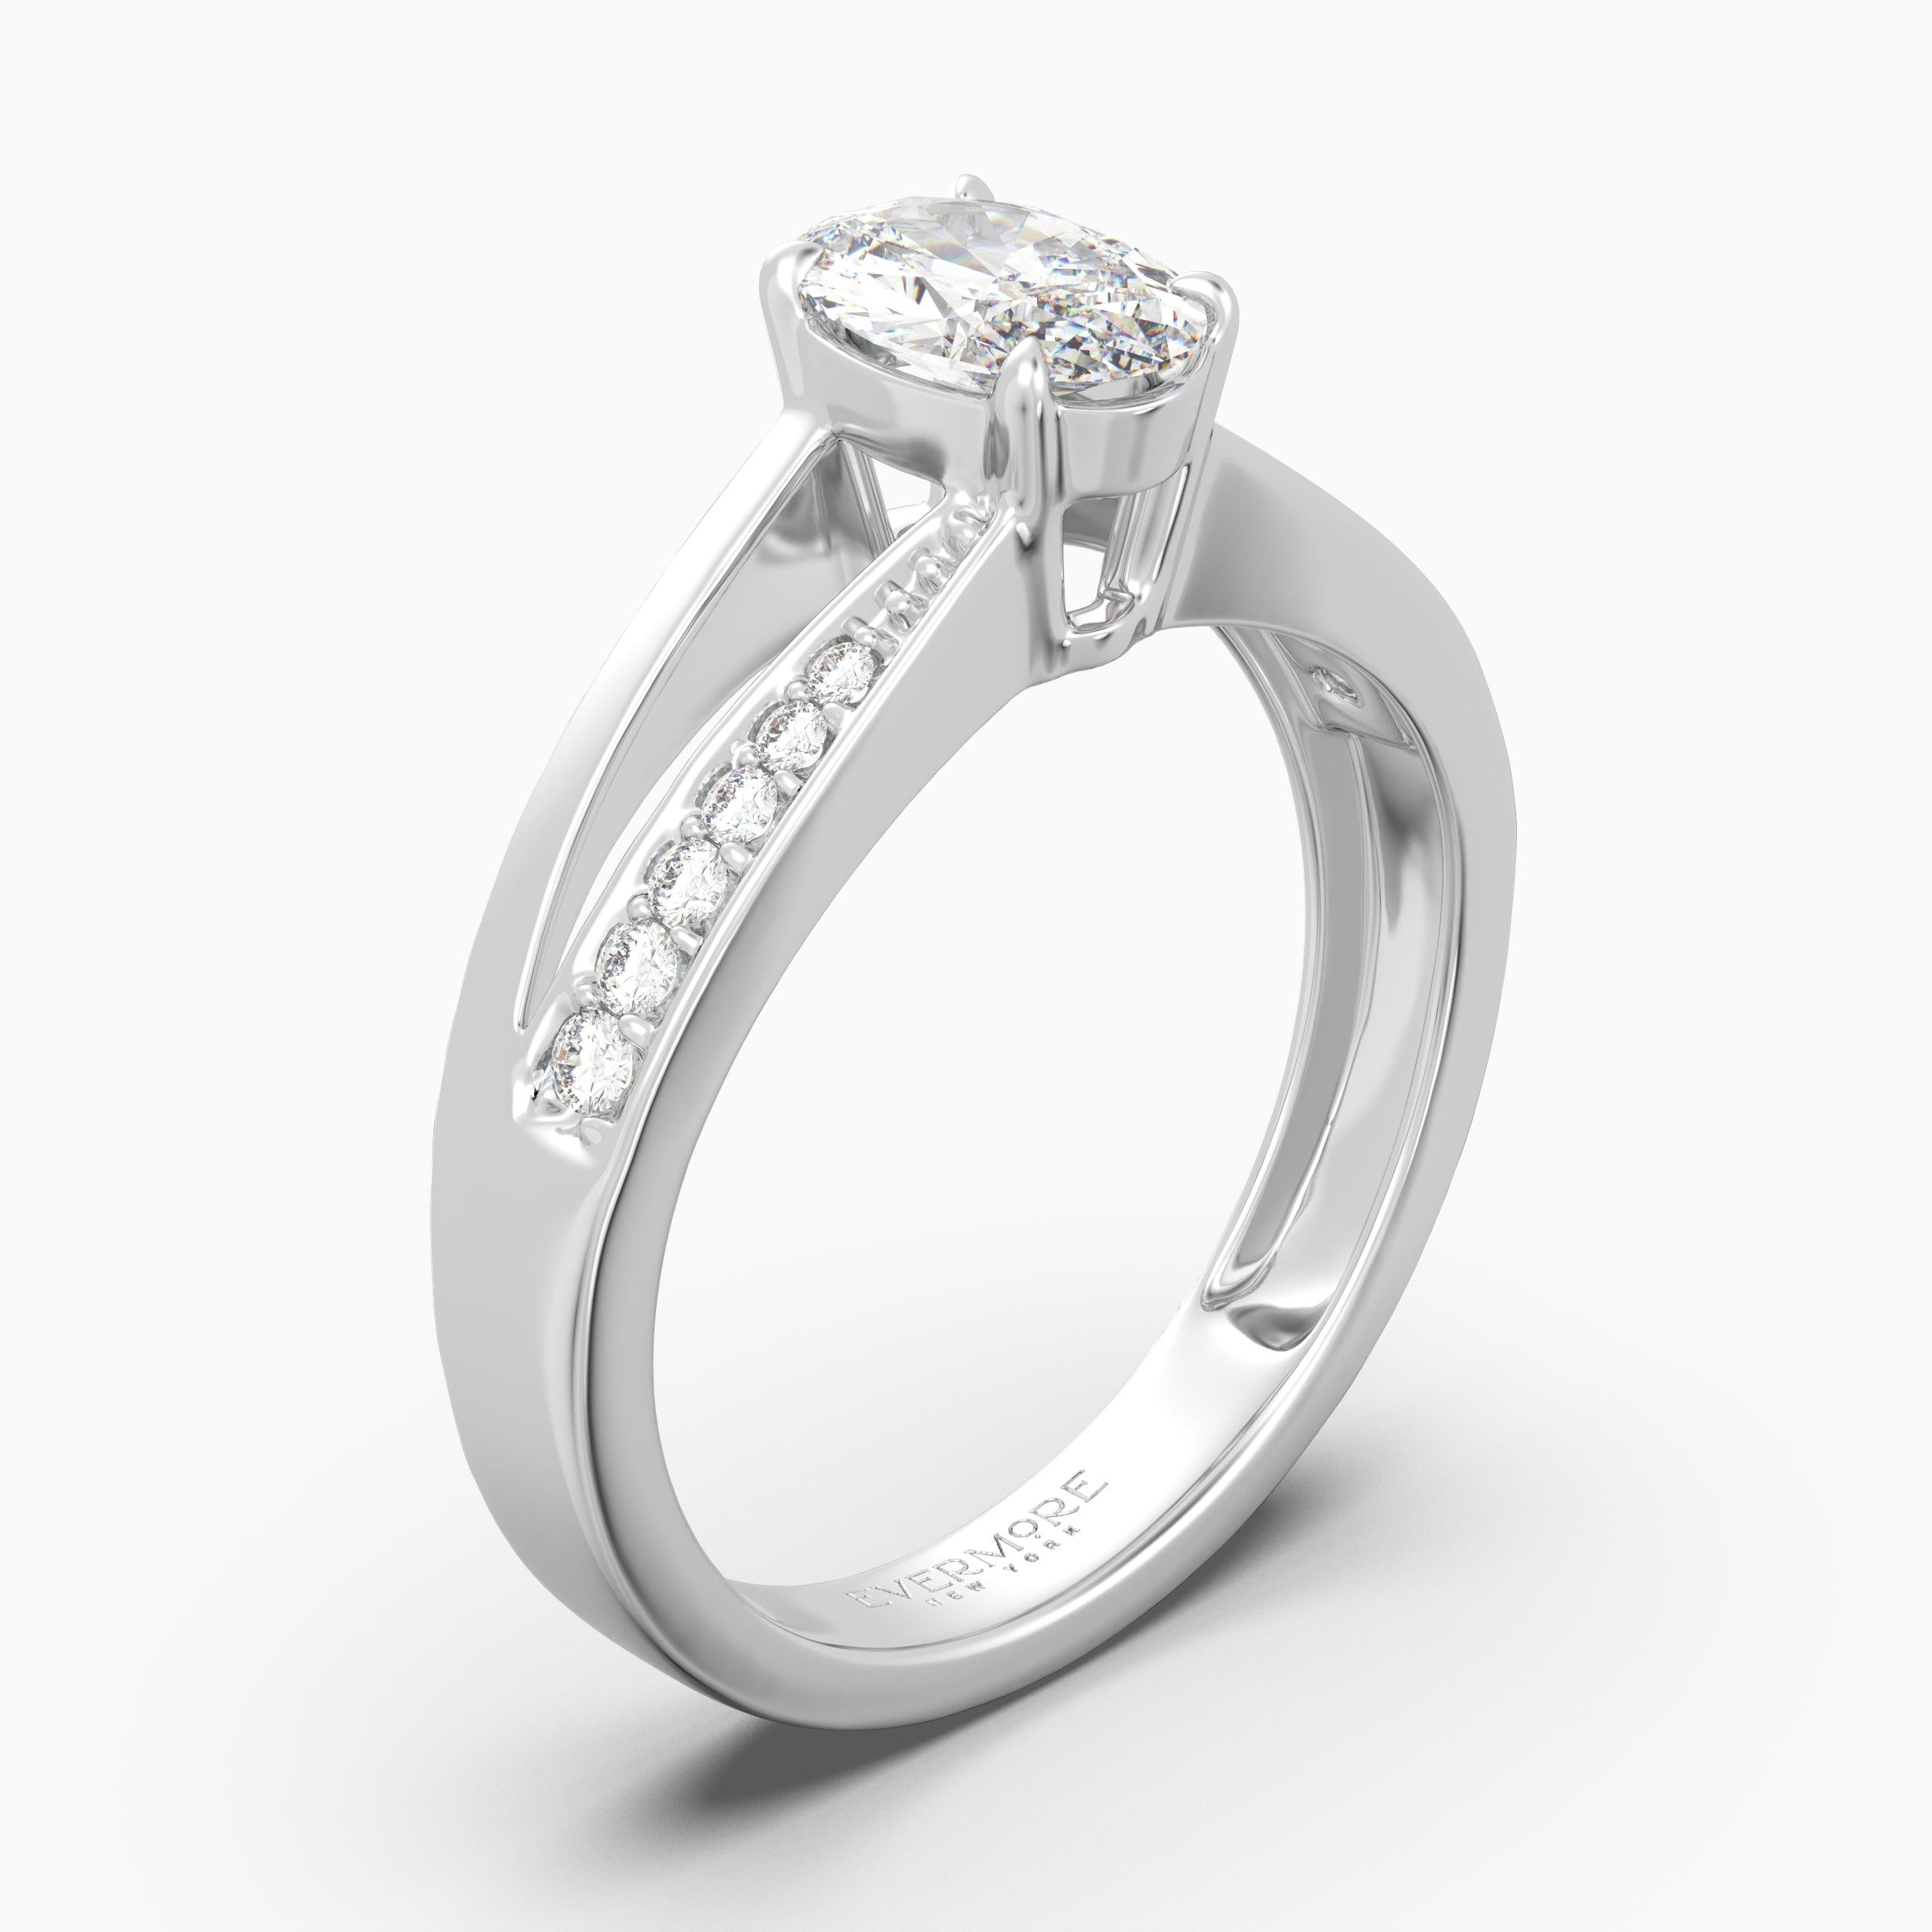 The Duet Oval Cut - White Gold / 0.5 ct - Evermore Diamonds